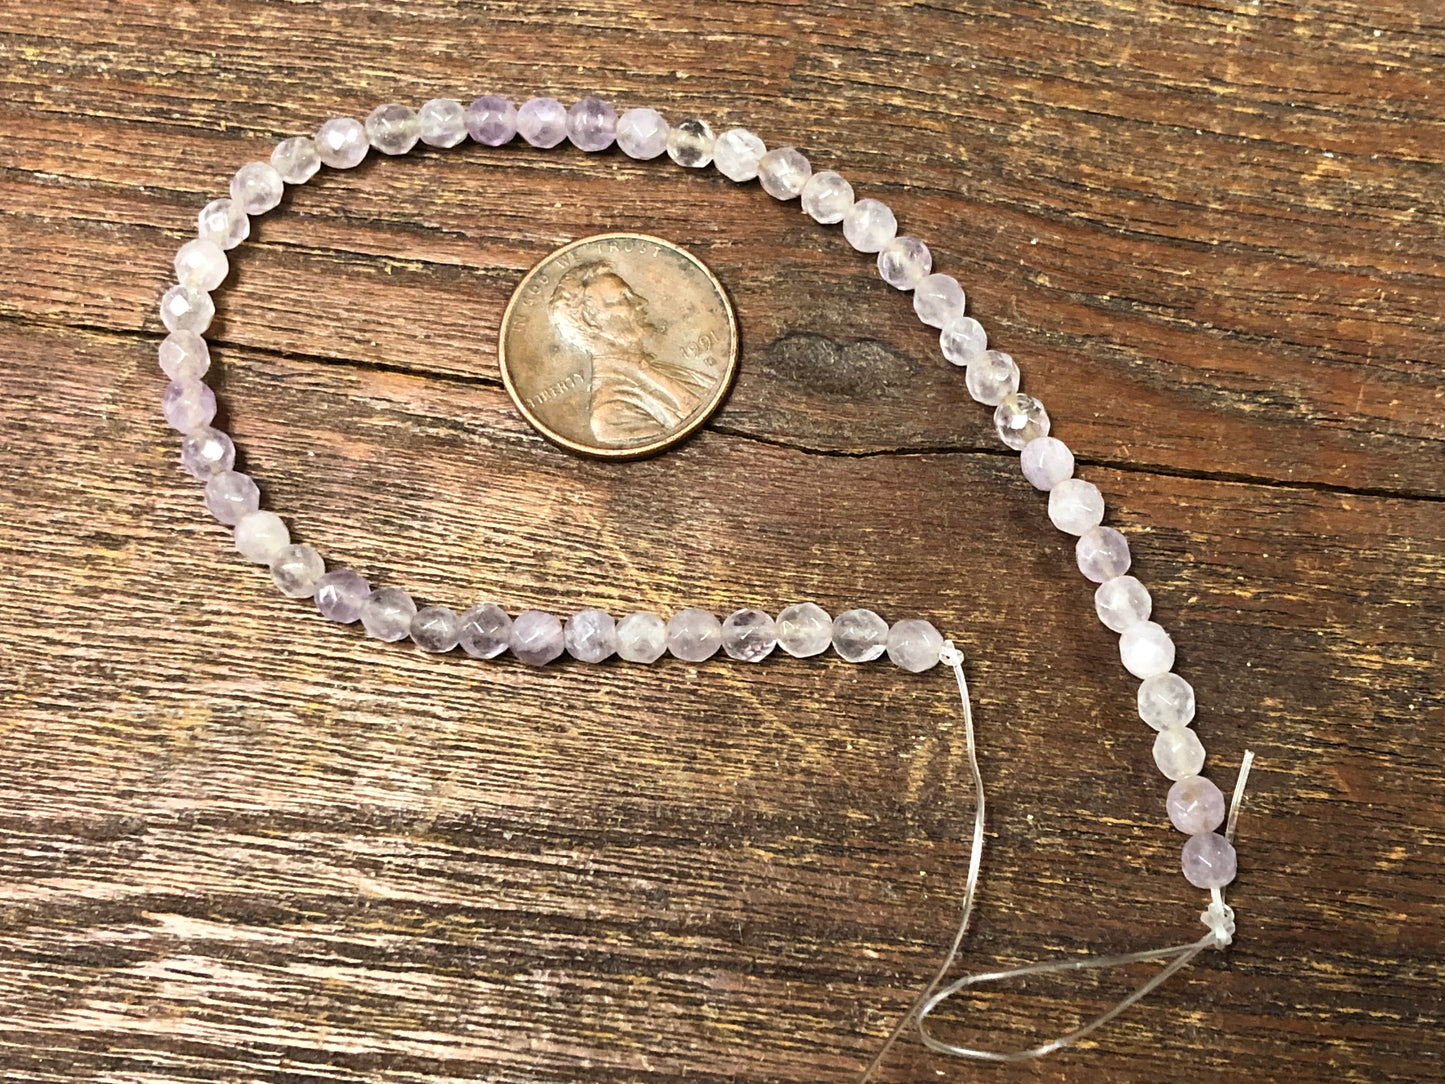 Lavender Amethyst 4mm Faceted Round Beads - 8" Strand